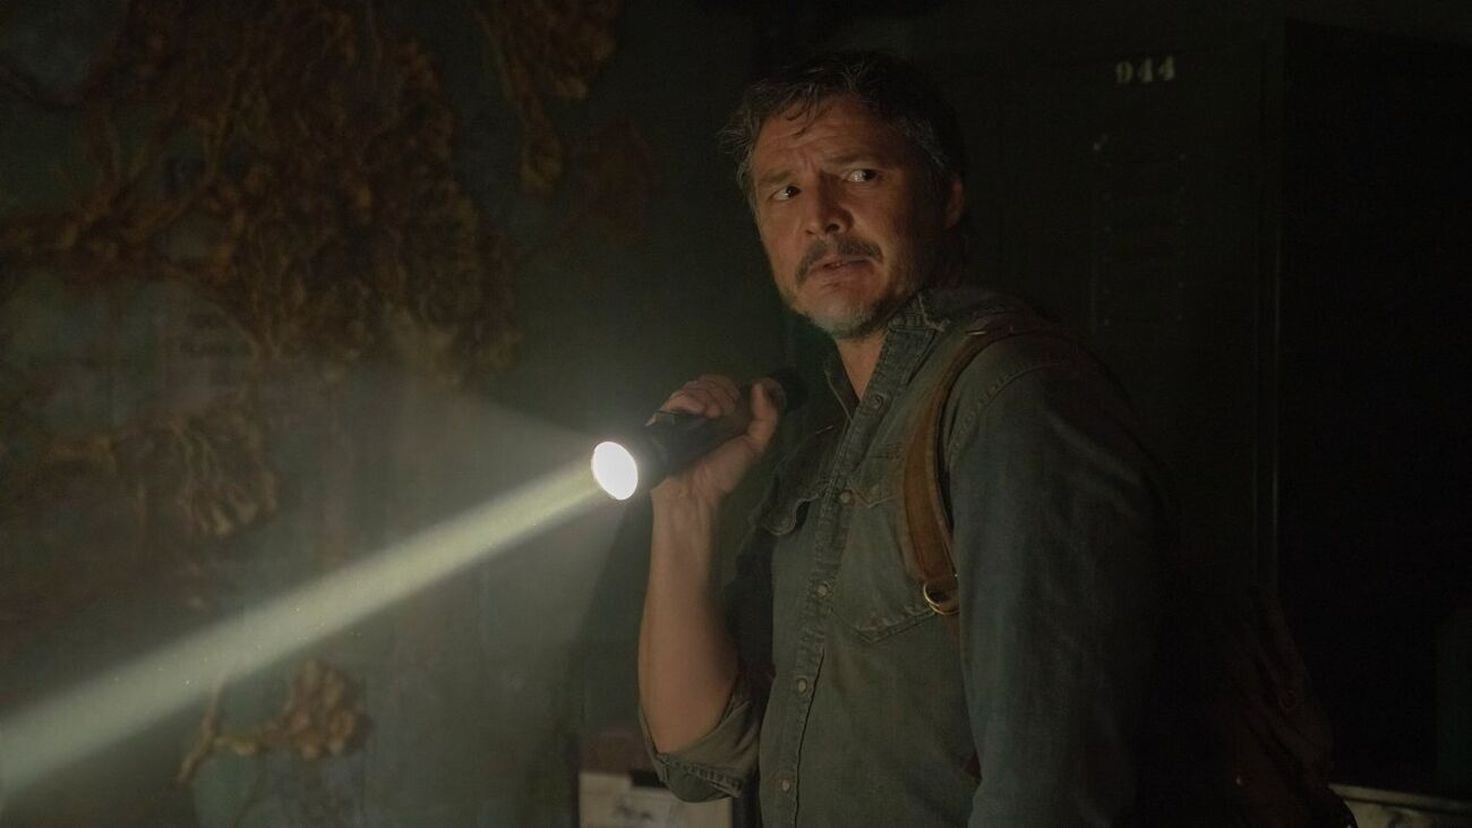 Last of Us' star Pedro Pascal doesn't think he'd survive a zombie